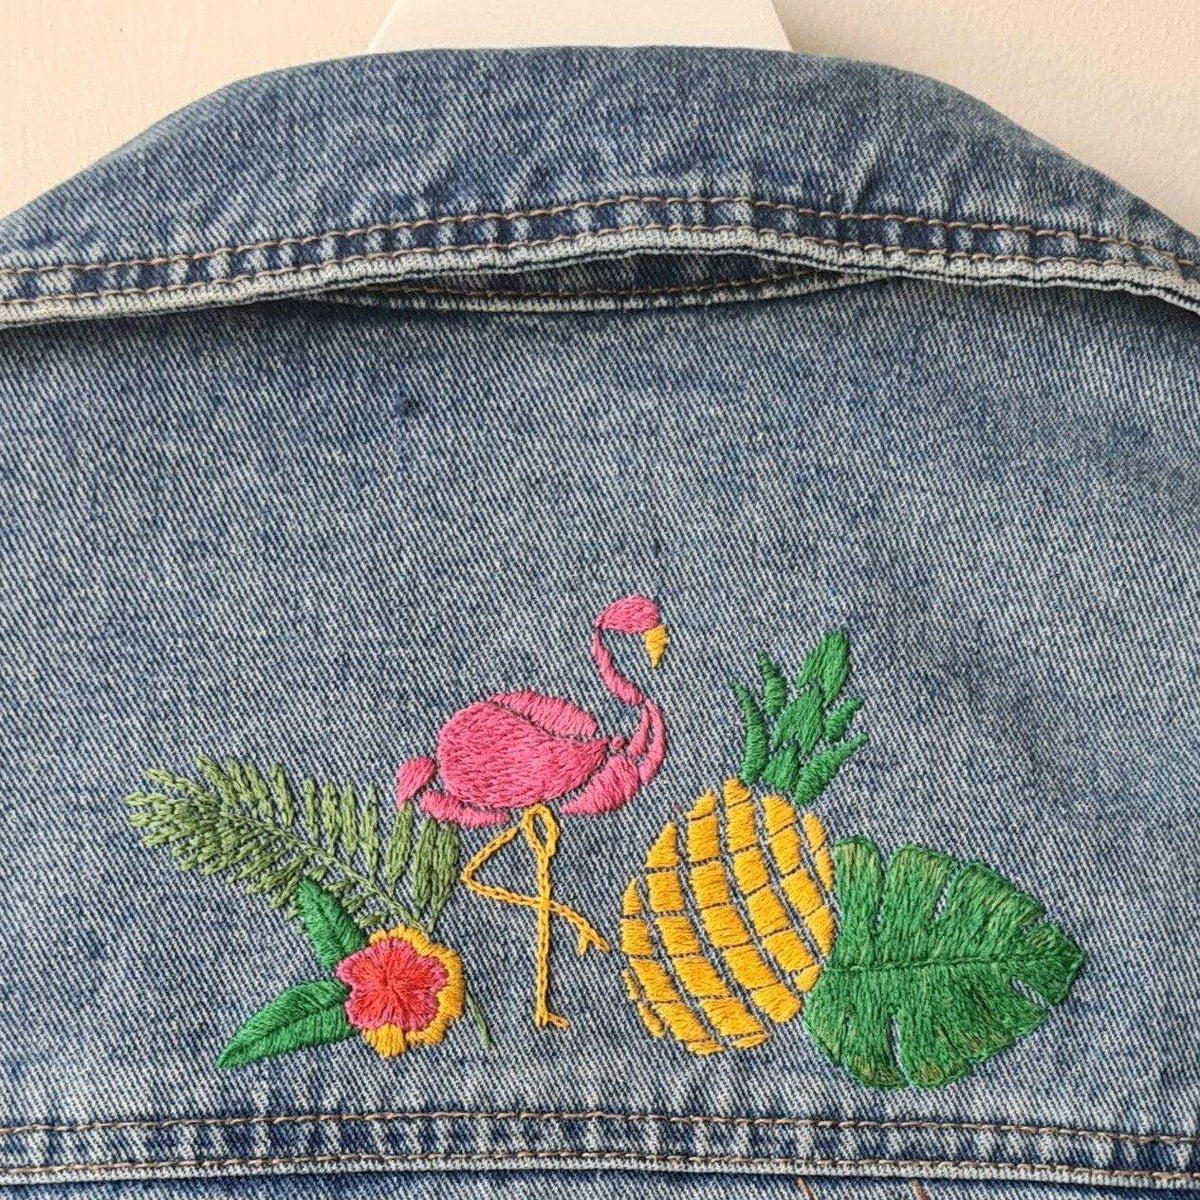 Paraffle Embroidery Tropical Customise Kit